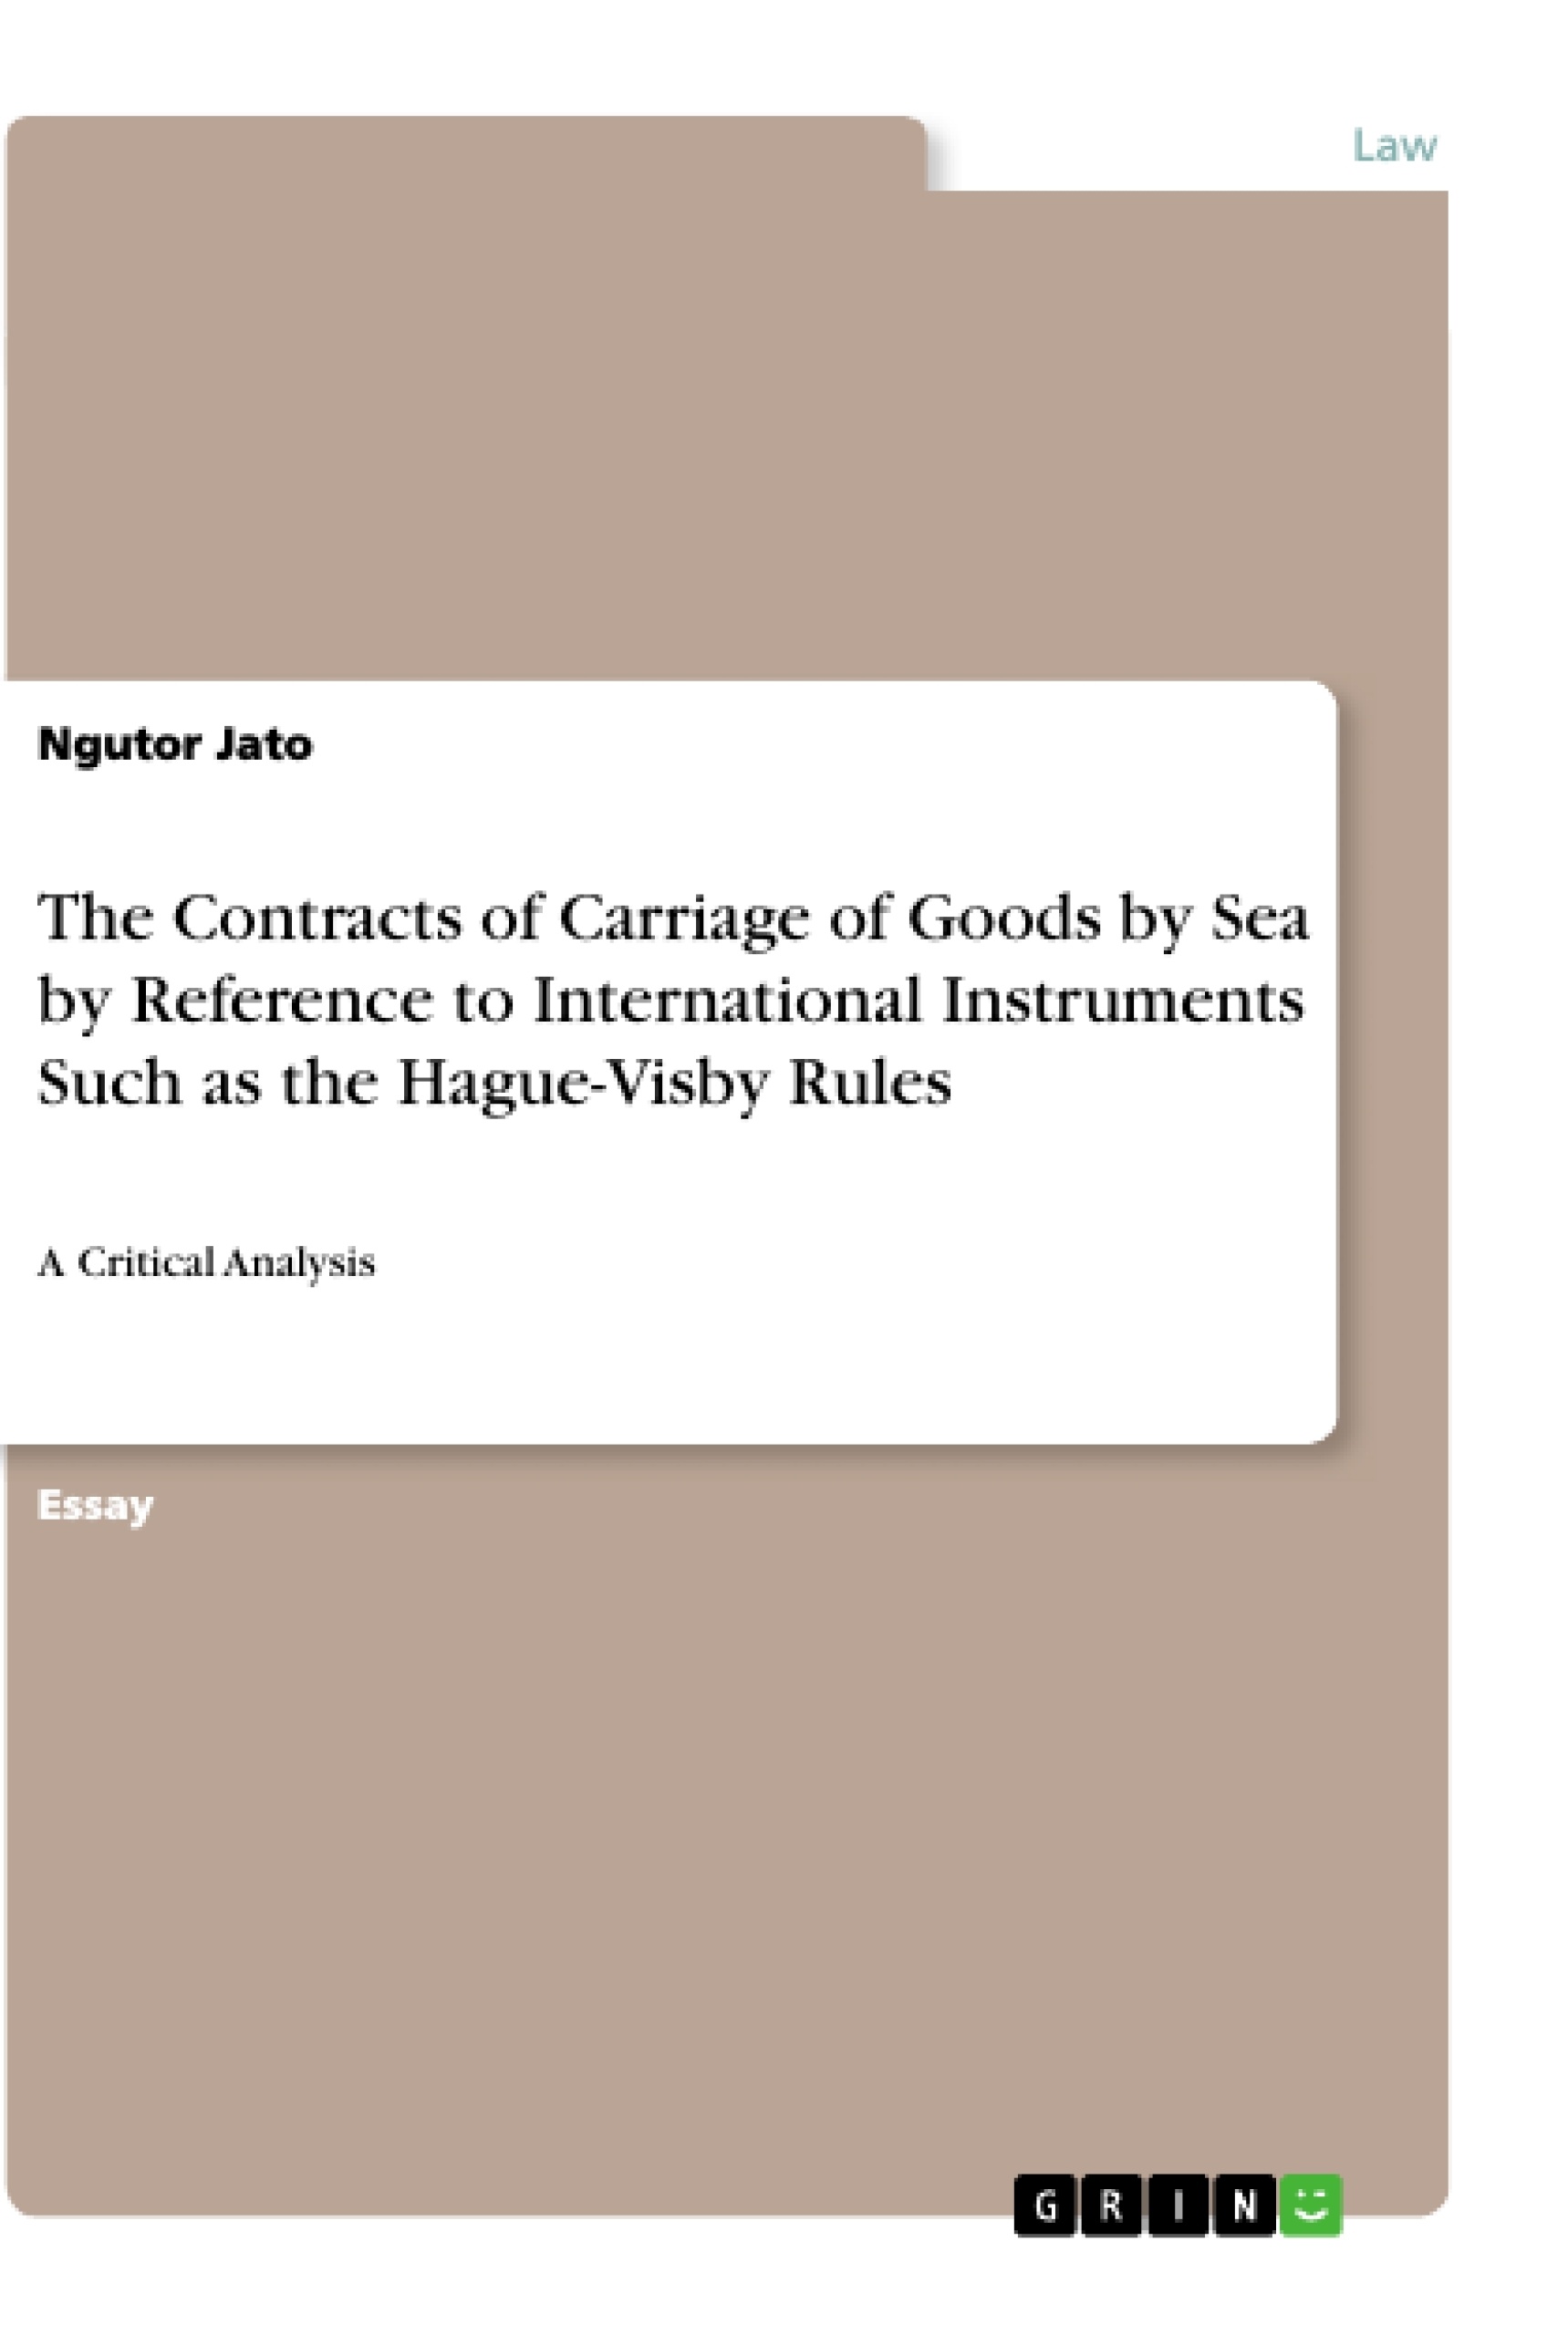 Titre: The Contracts of Carriage of Goods by Sea by Reference to International Instruments Such as the Hague-Visby Rules